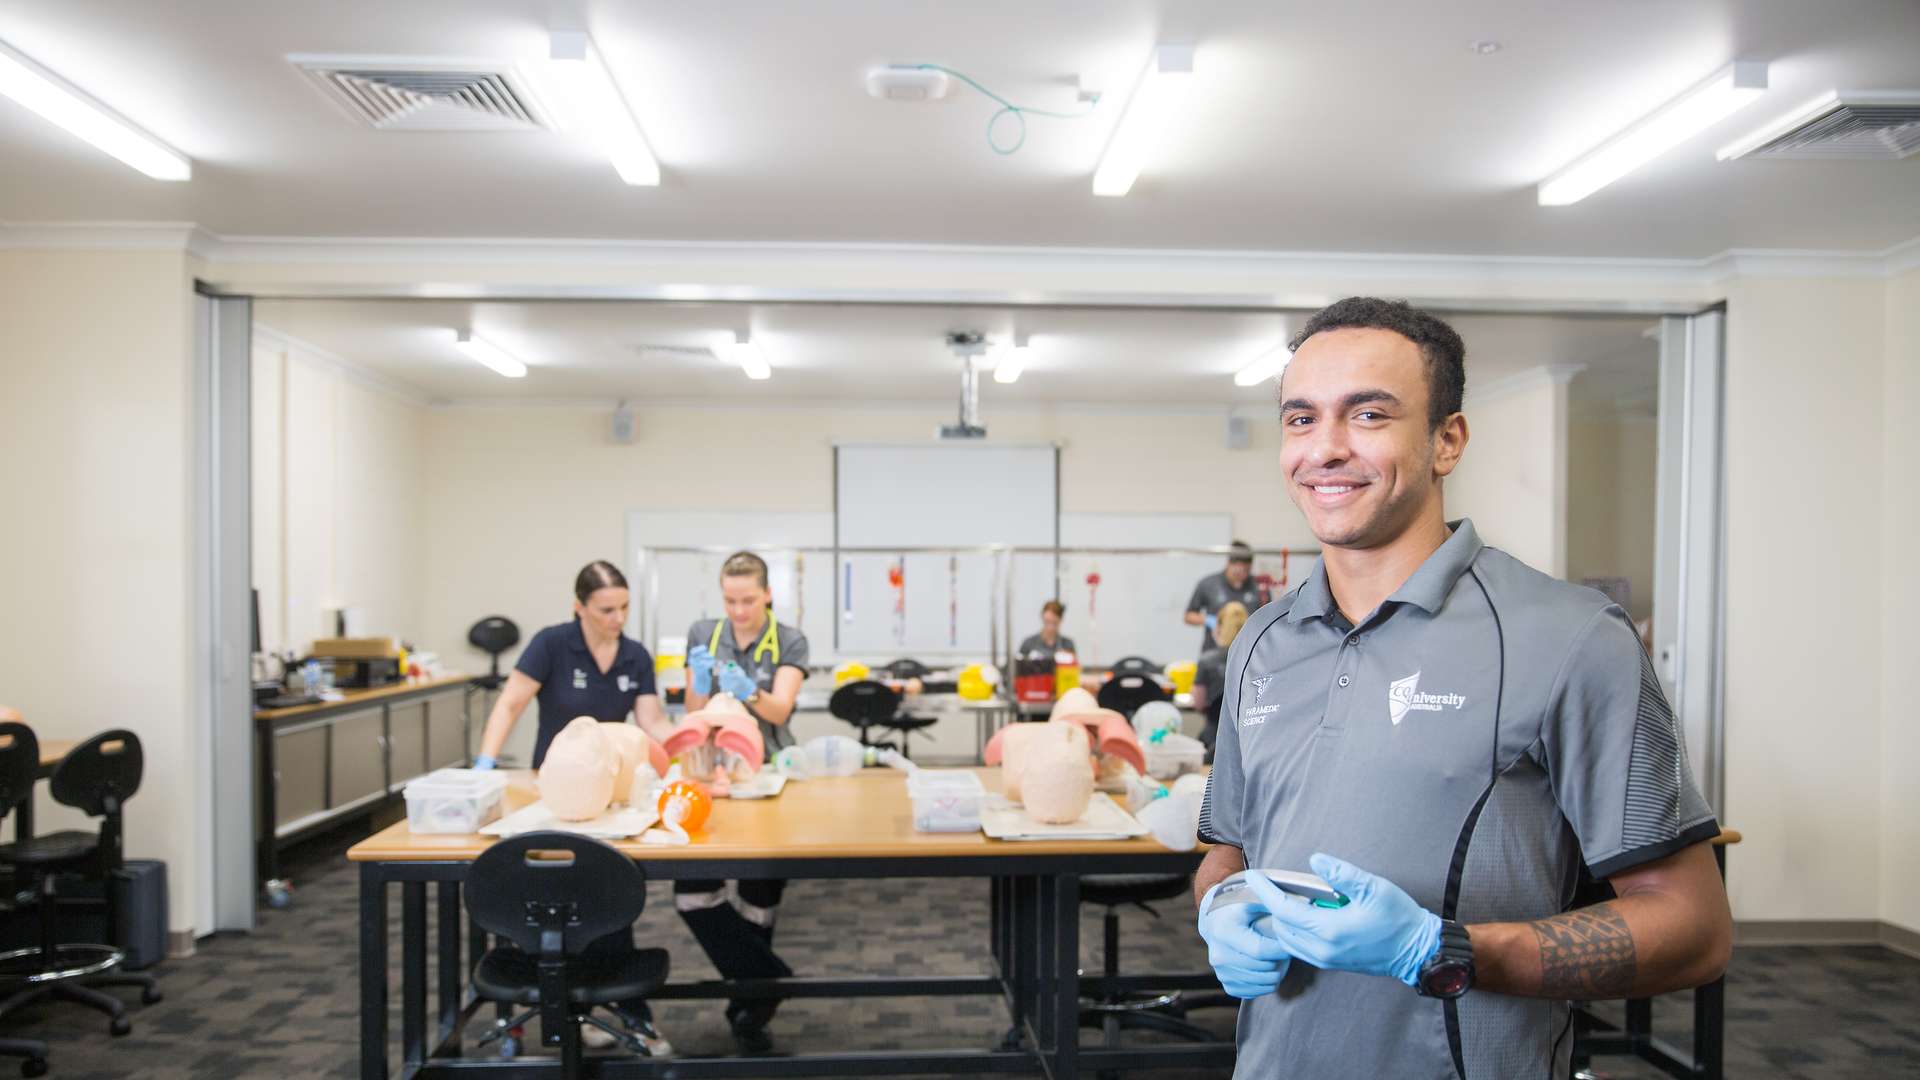 Paramedic science student smiles at camera while students and lecturer work in the background.